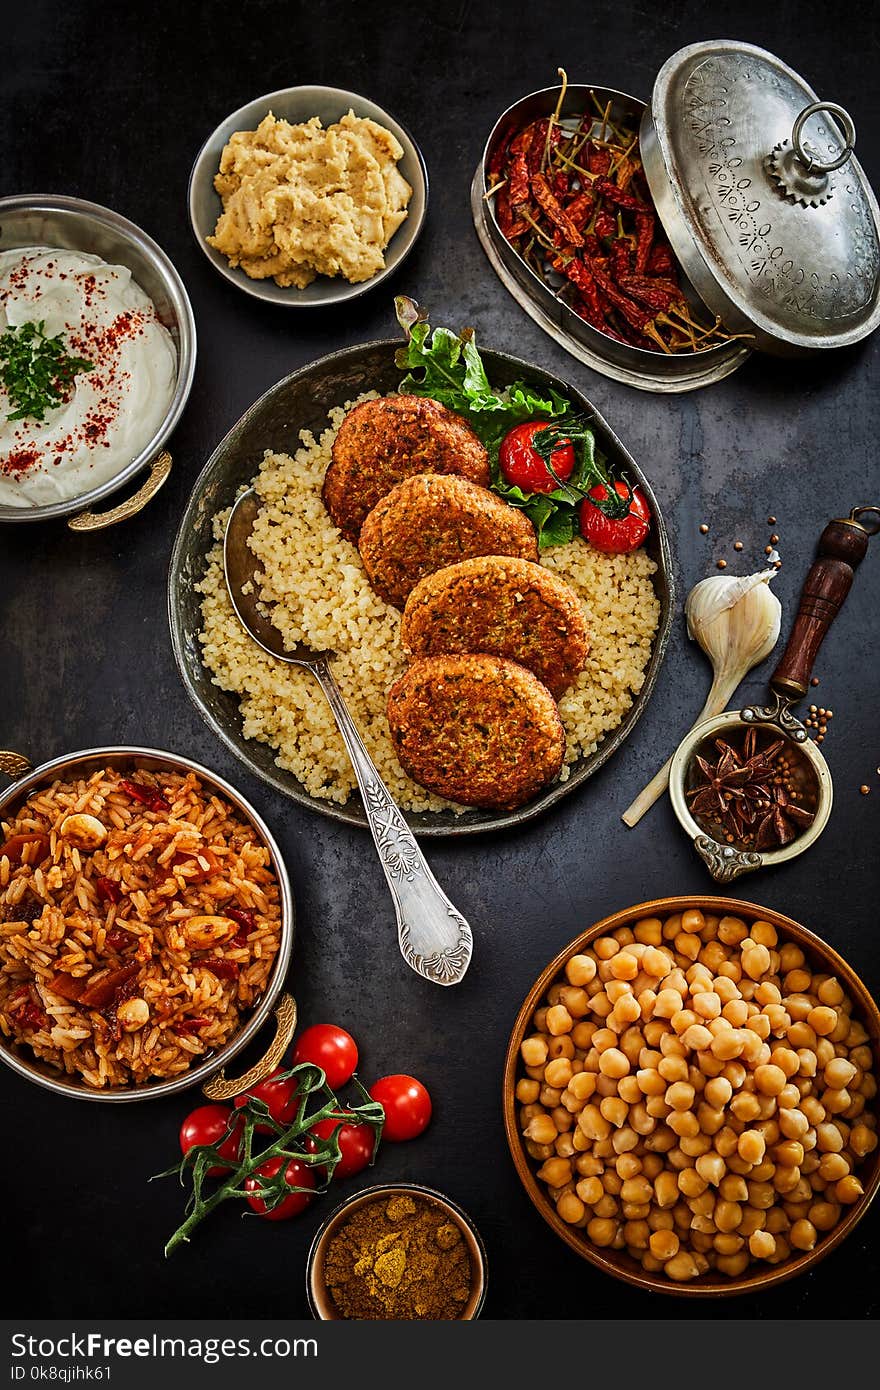 Assorted jewish and middle east levante cuisine prepared traditional food in dishes and pans viewed from above served on dark table surface. Assorted jewish and middle east levante cuisine prepared traditional food in dishes and pans viewed from above served on dark table surface